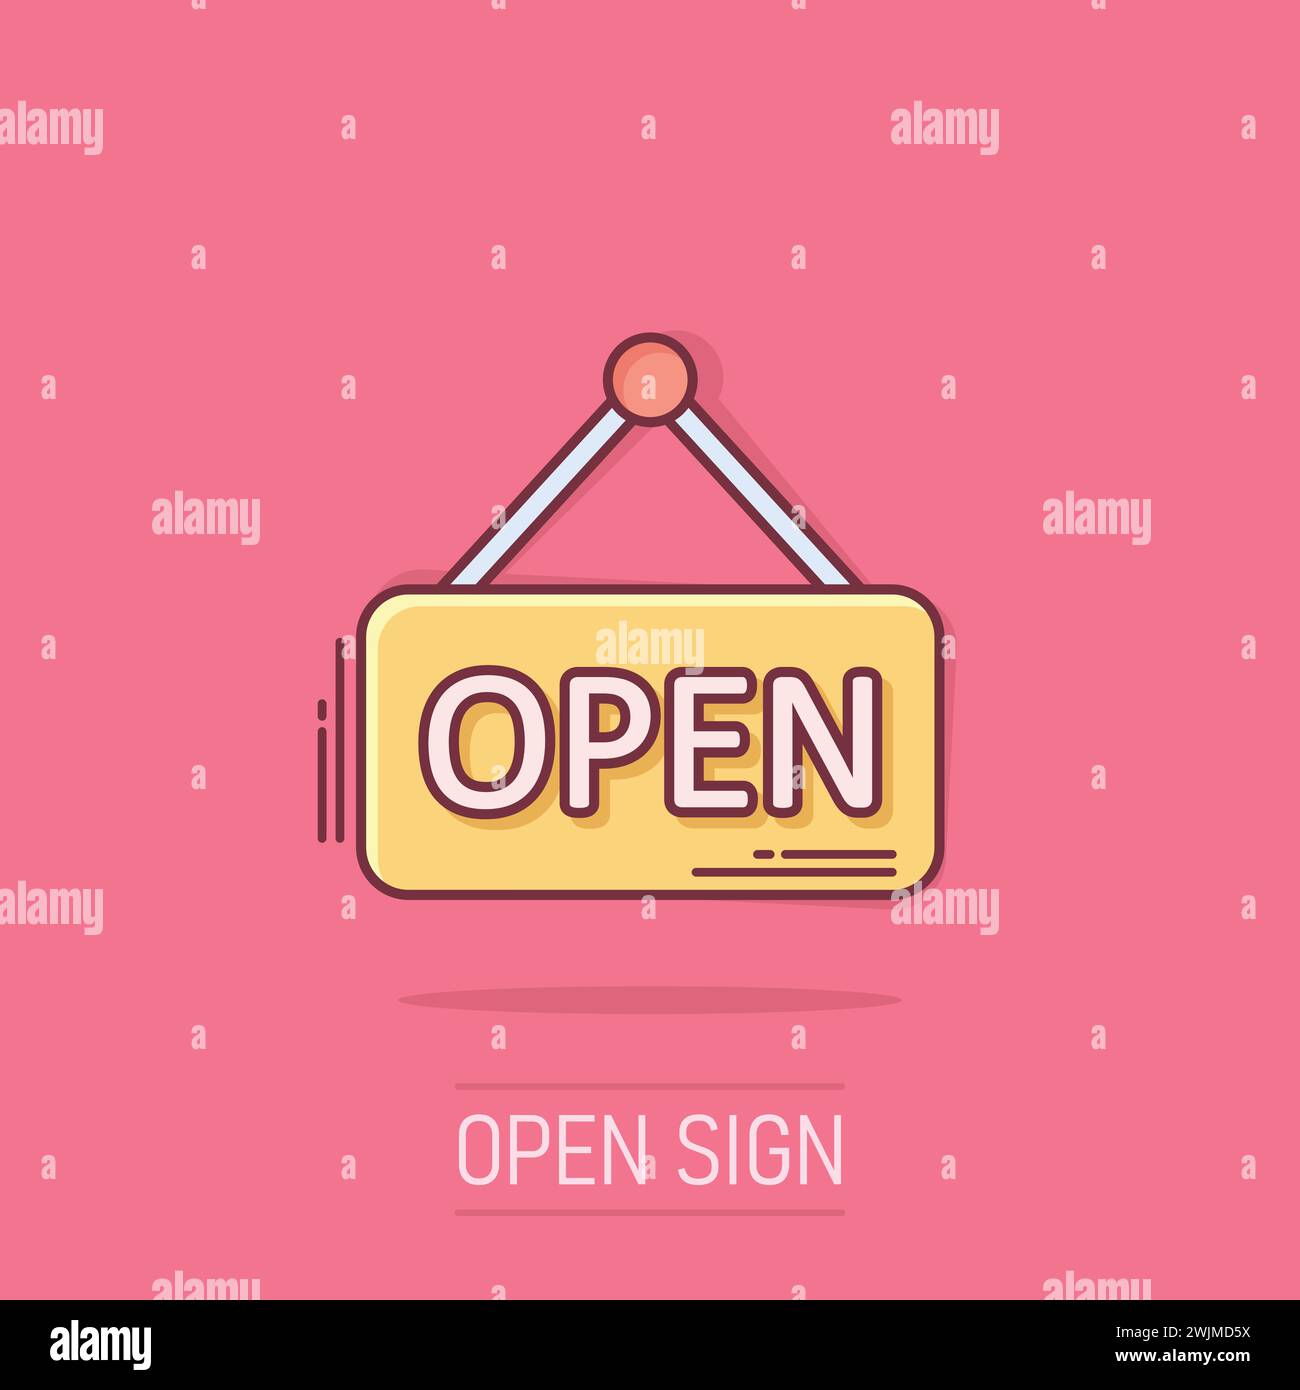 Open sign icon in comic style. Accessibility cartoon vector illustration on isolated background. Message splash effect business concept. Stock Vector